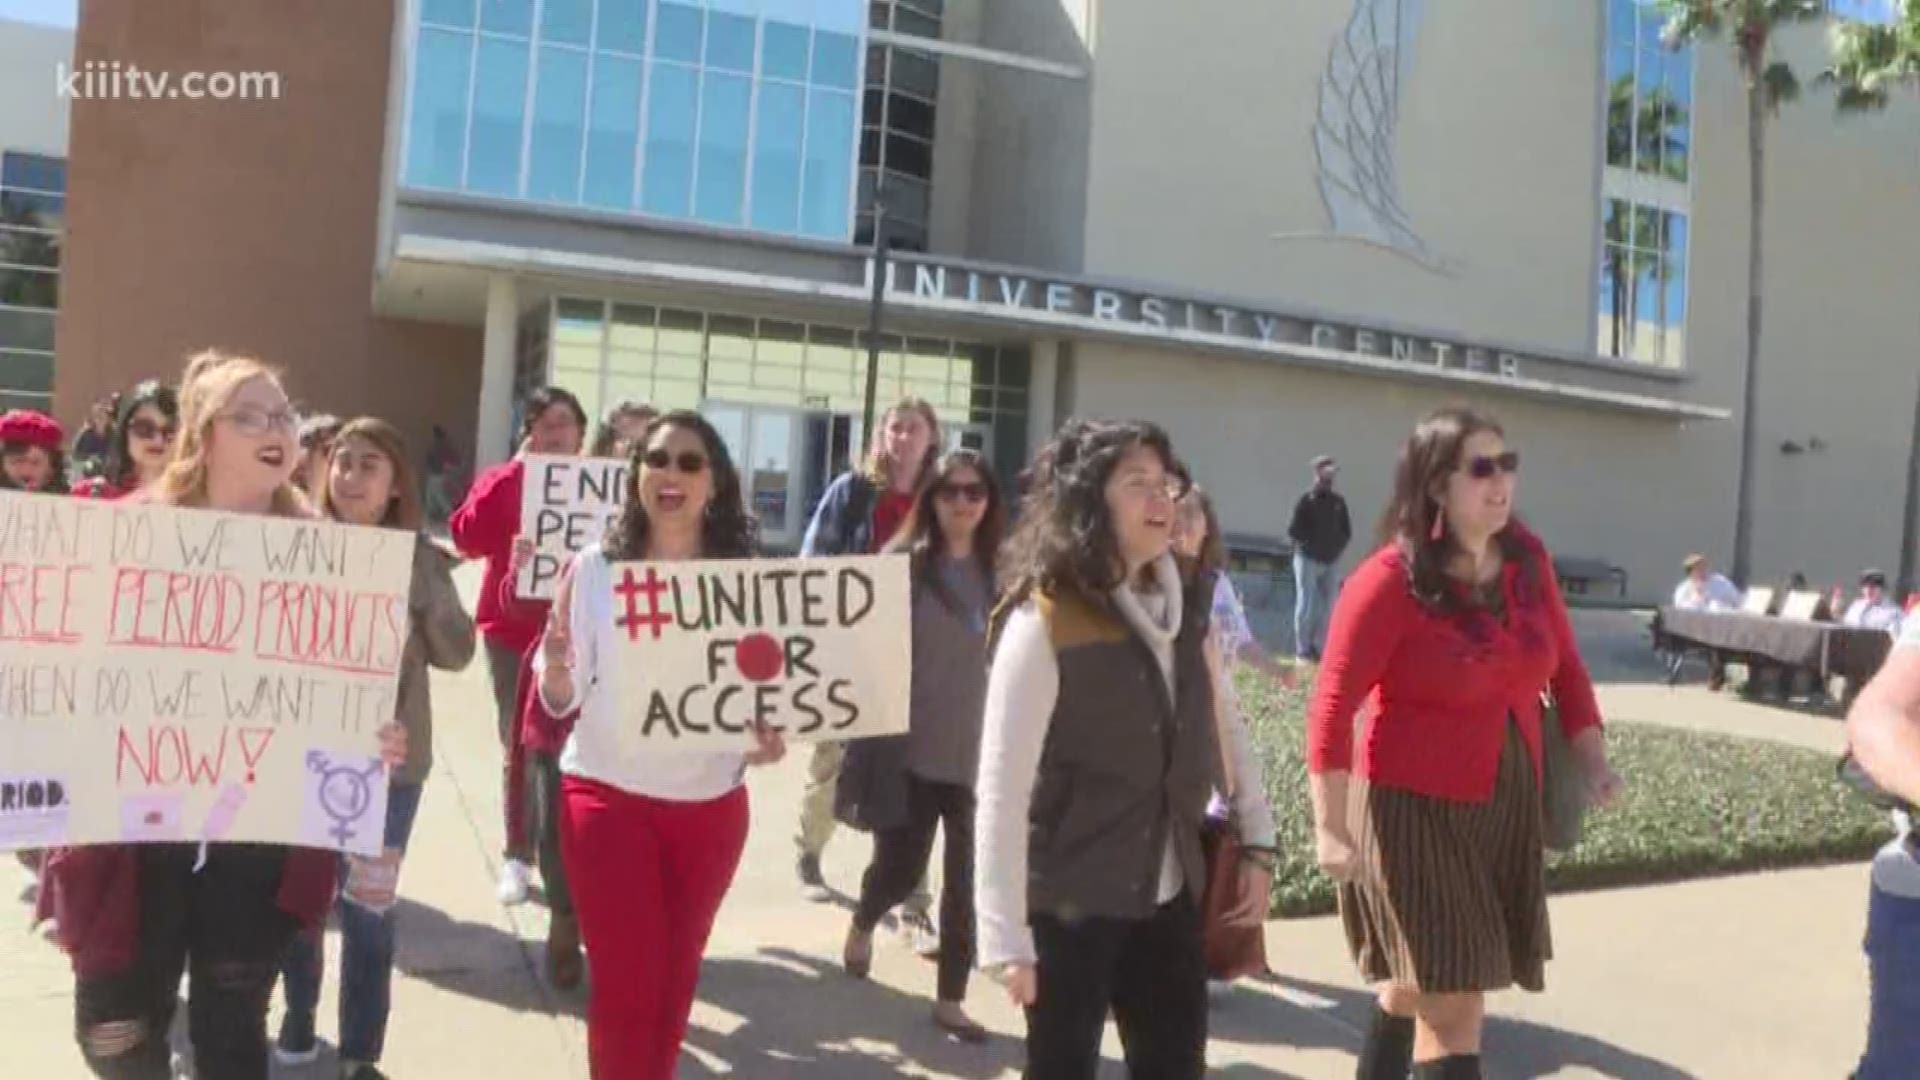 Students and activists marched on the campus of Texas A&M University-Corpus Christi Thursday to bring attention to female hygiene products.